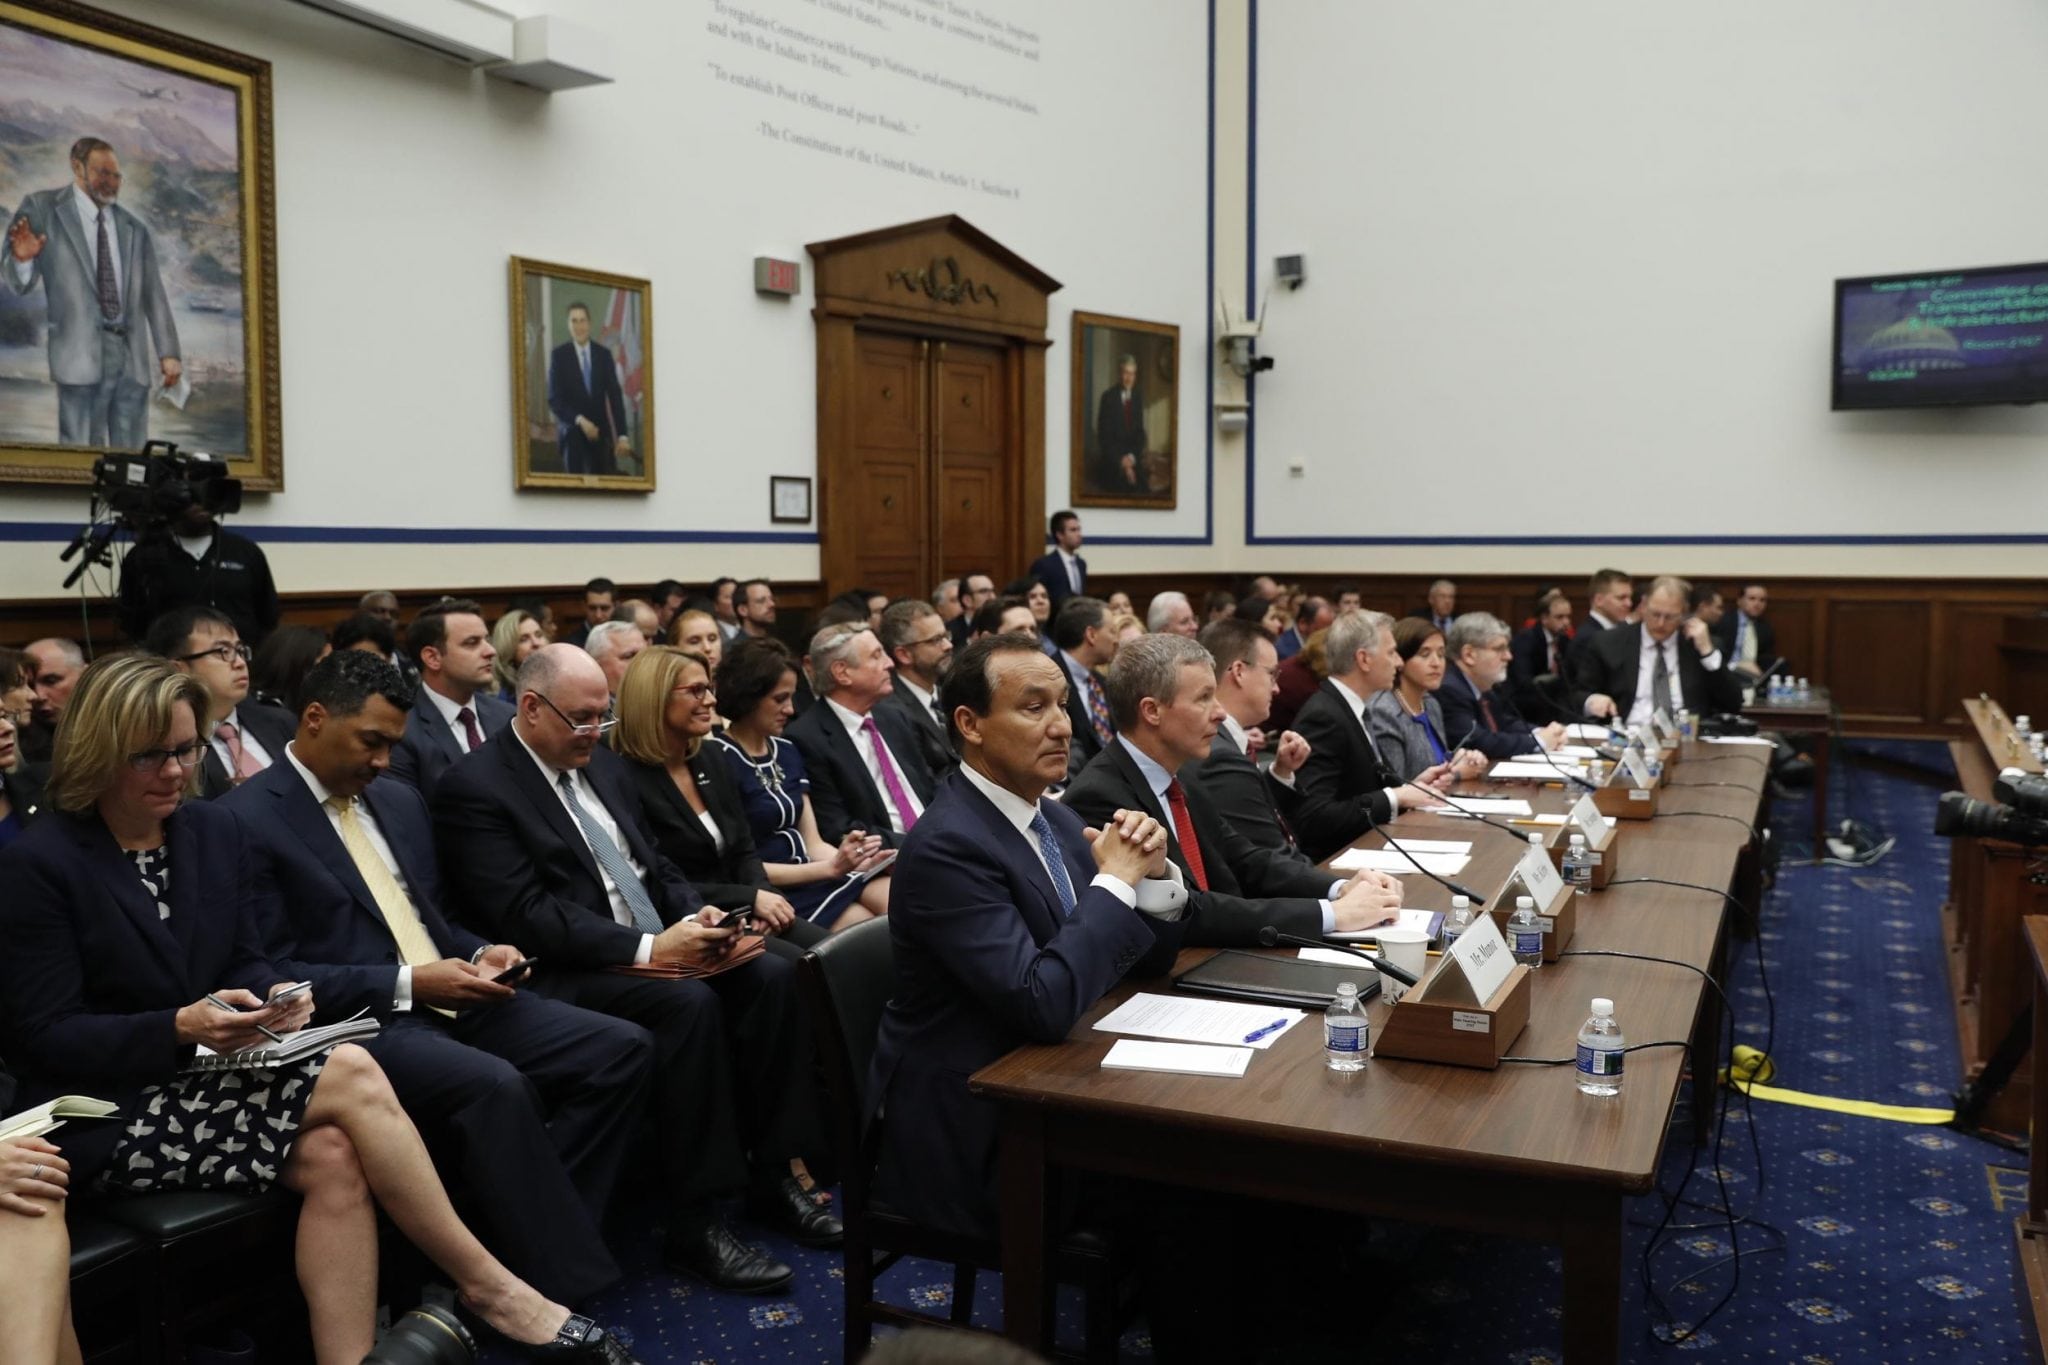 United CEO Oscar Munoz (foreground) was one of five airline executives take questions Tuesday from a Congressional committee. Lawmakers were concerned airlines do not offer proper customer service.